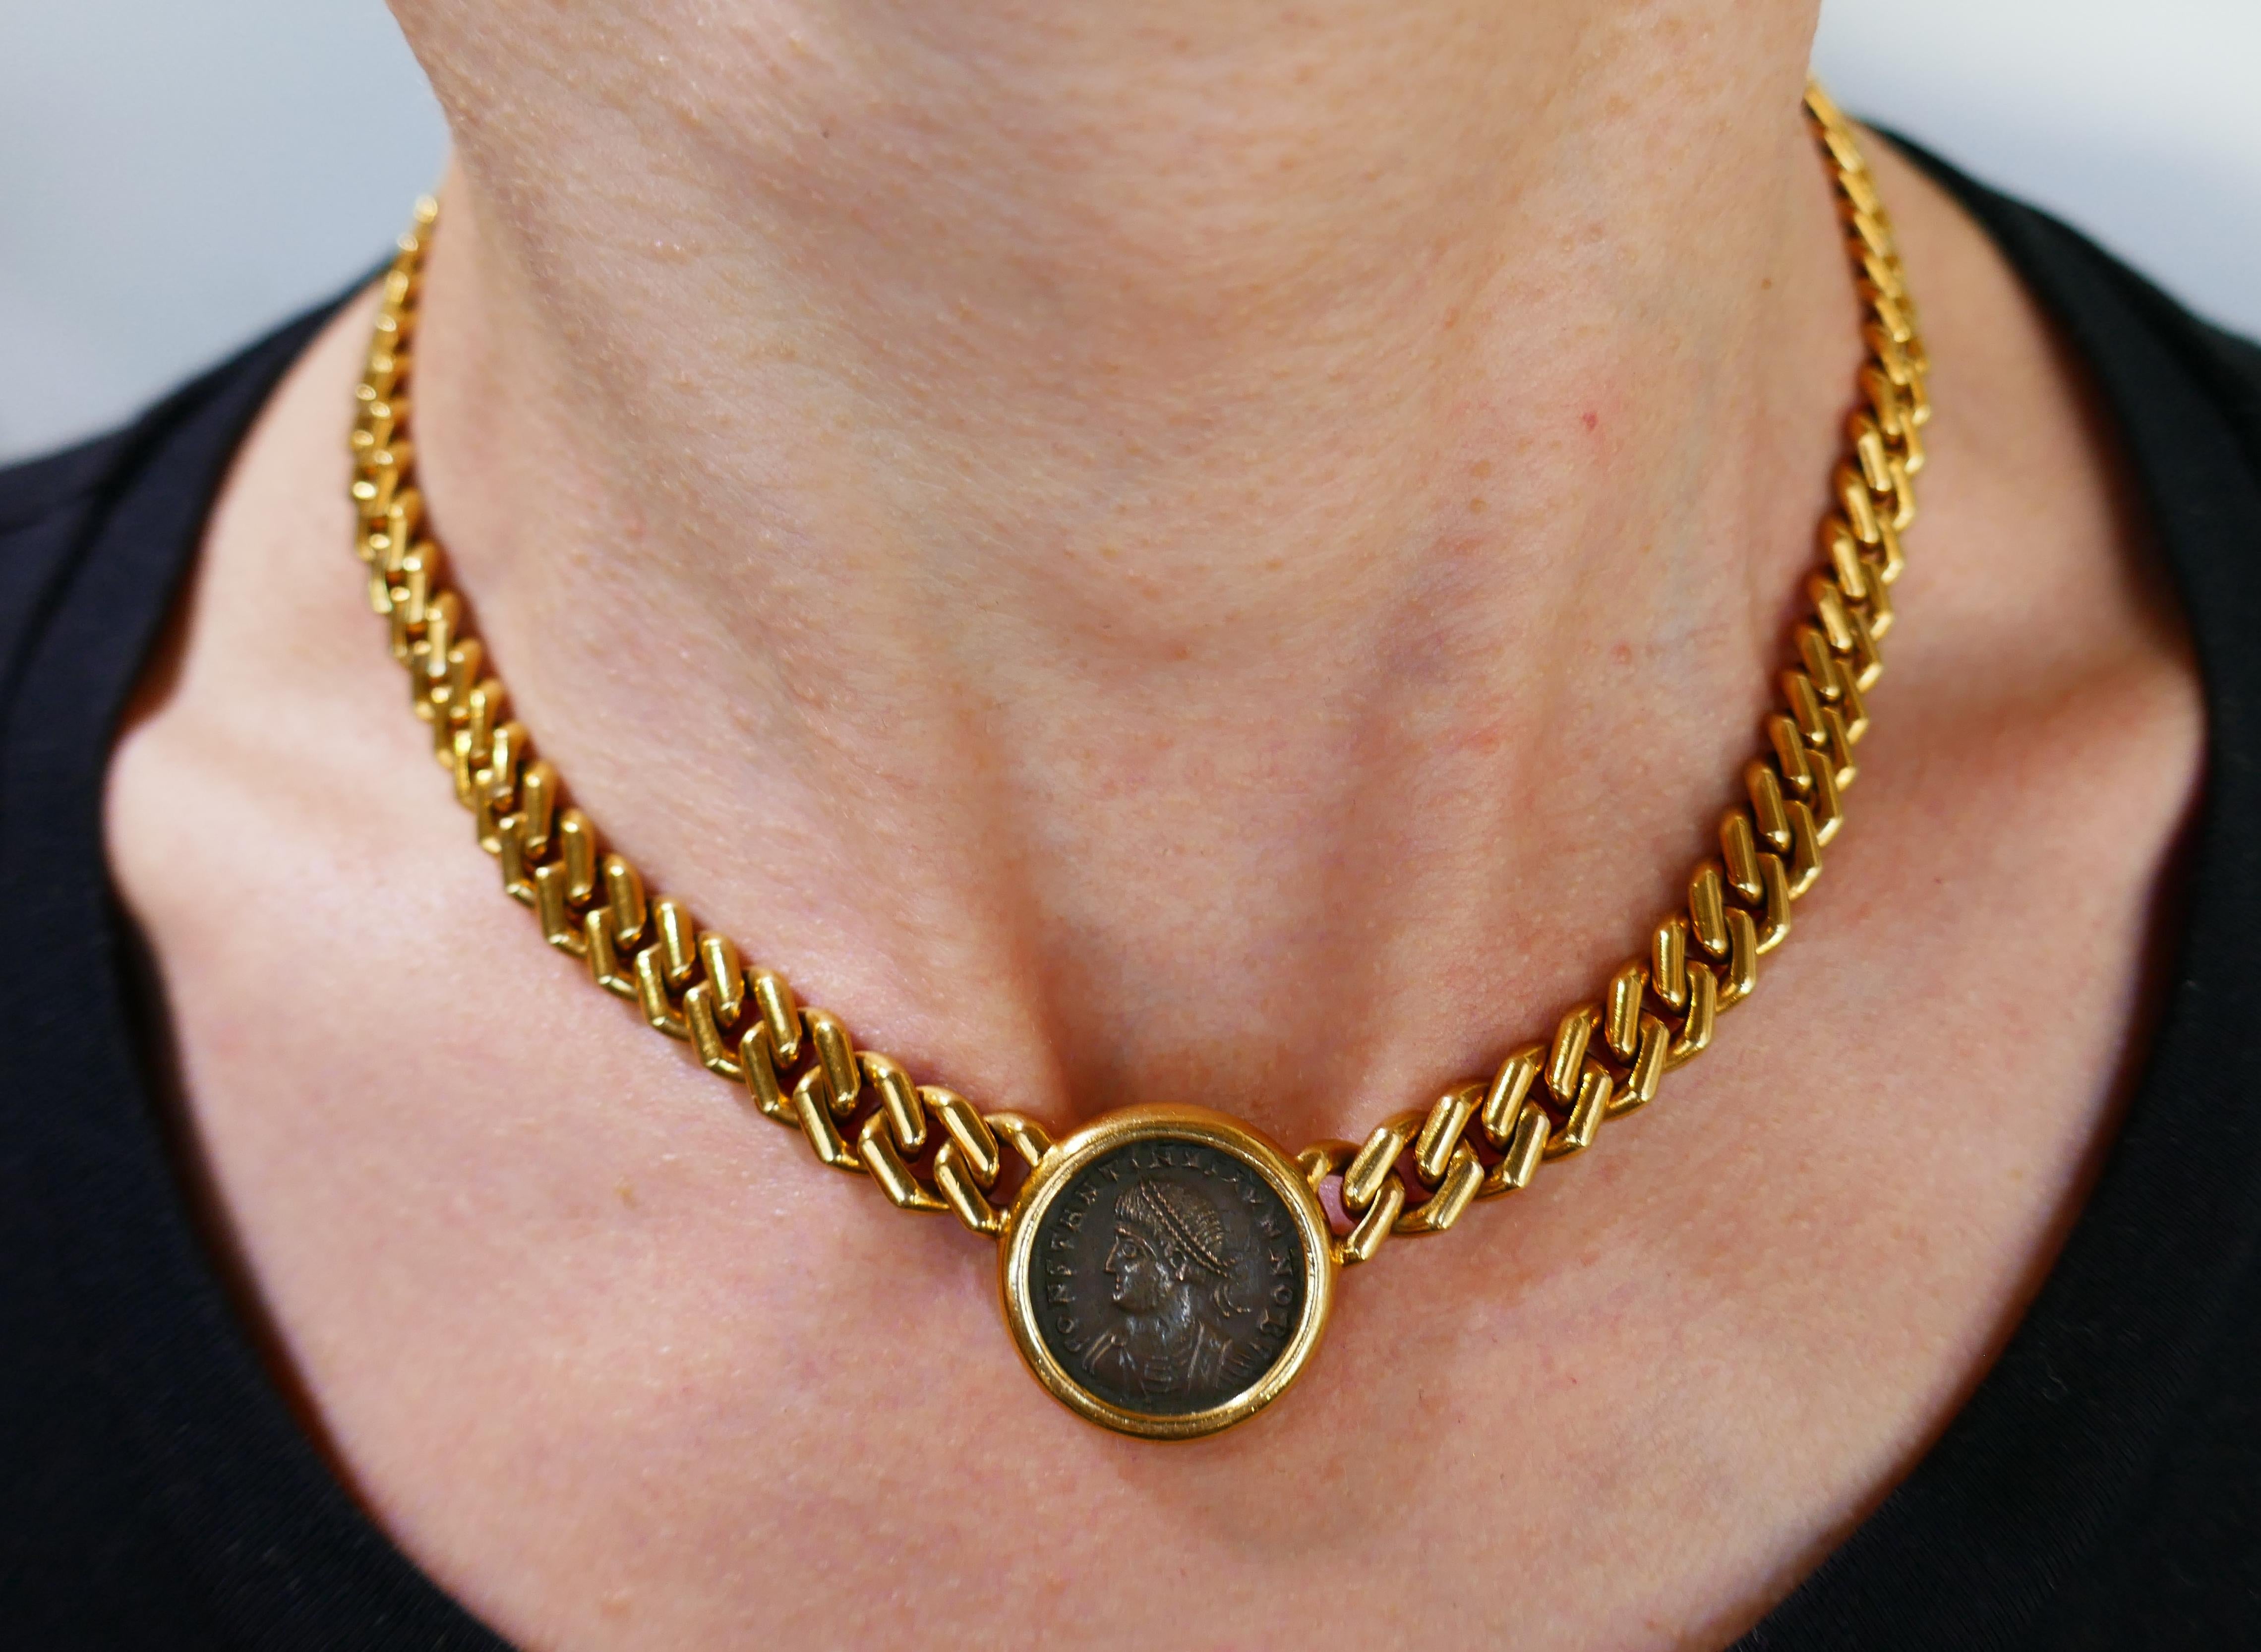 Signature Bulgari coin necklace from Monete Collection. Bold, elegant and wearable, the necklace is a great addition to your jewelry box.
The necklace is made of 18 karat yellow gold and features an ancient Roman bronze coin Constantino II dated